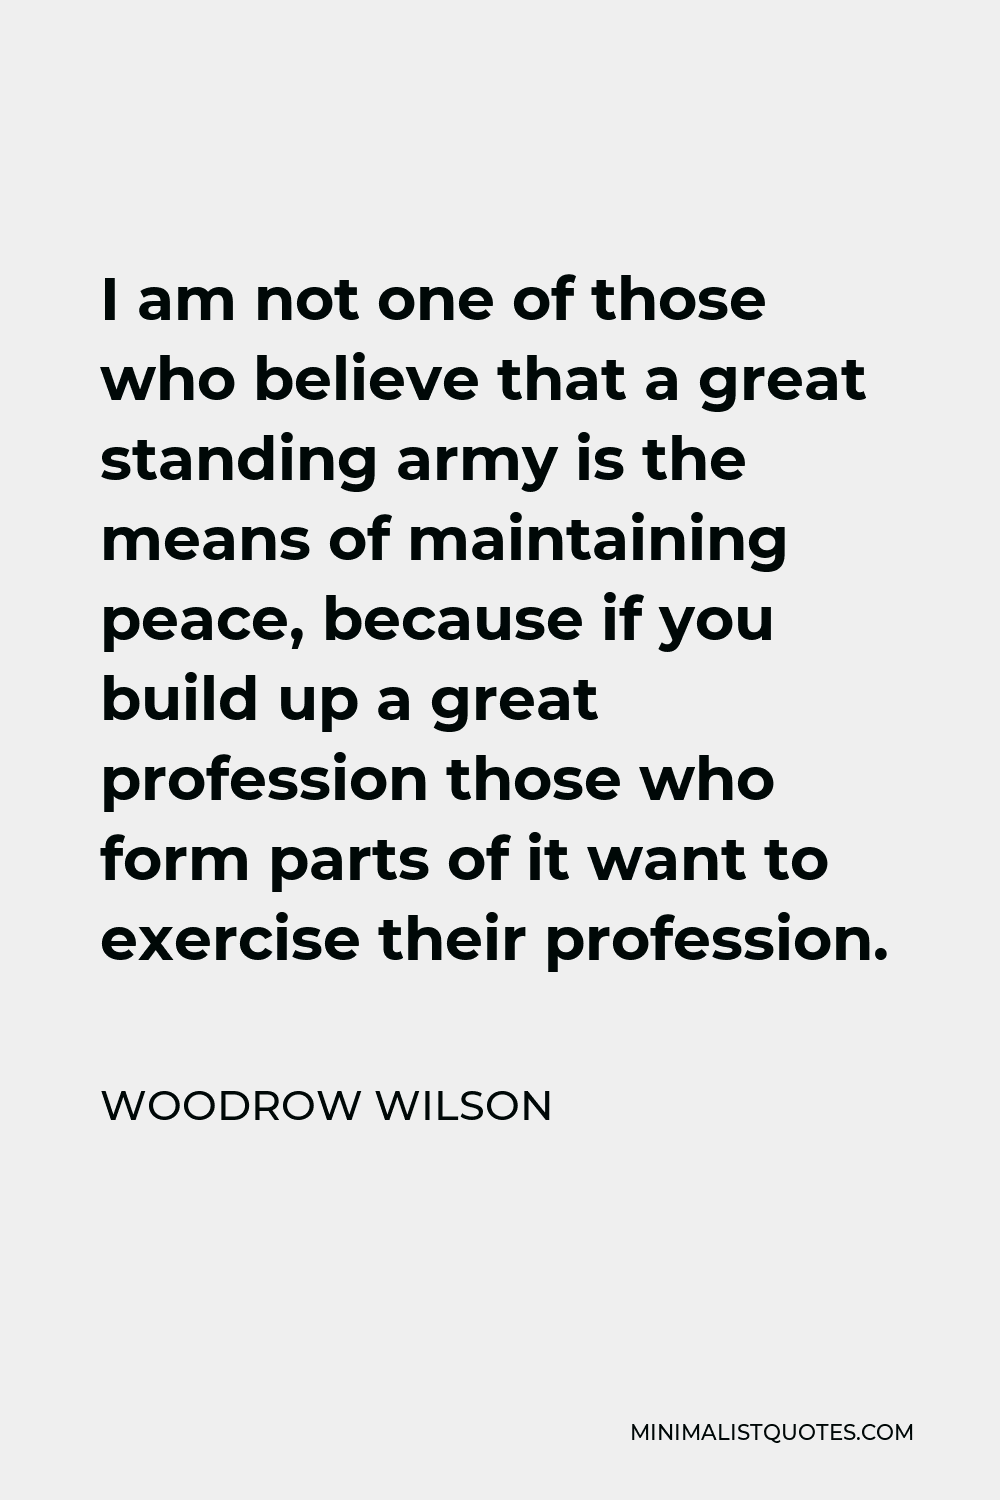 Woodrow Wilson Quote - I am not one of those who believe that a great standing army is the means of maintaining peace, because if you build up a great profession those who form parts of it want to exercise their profession.